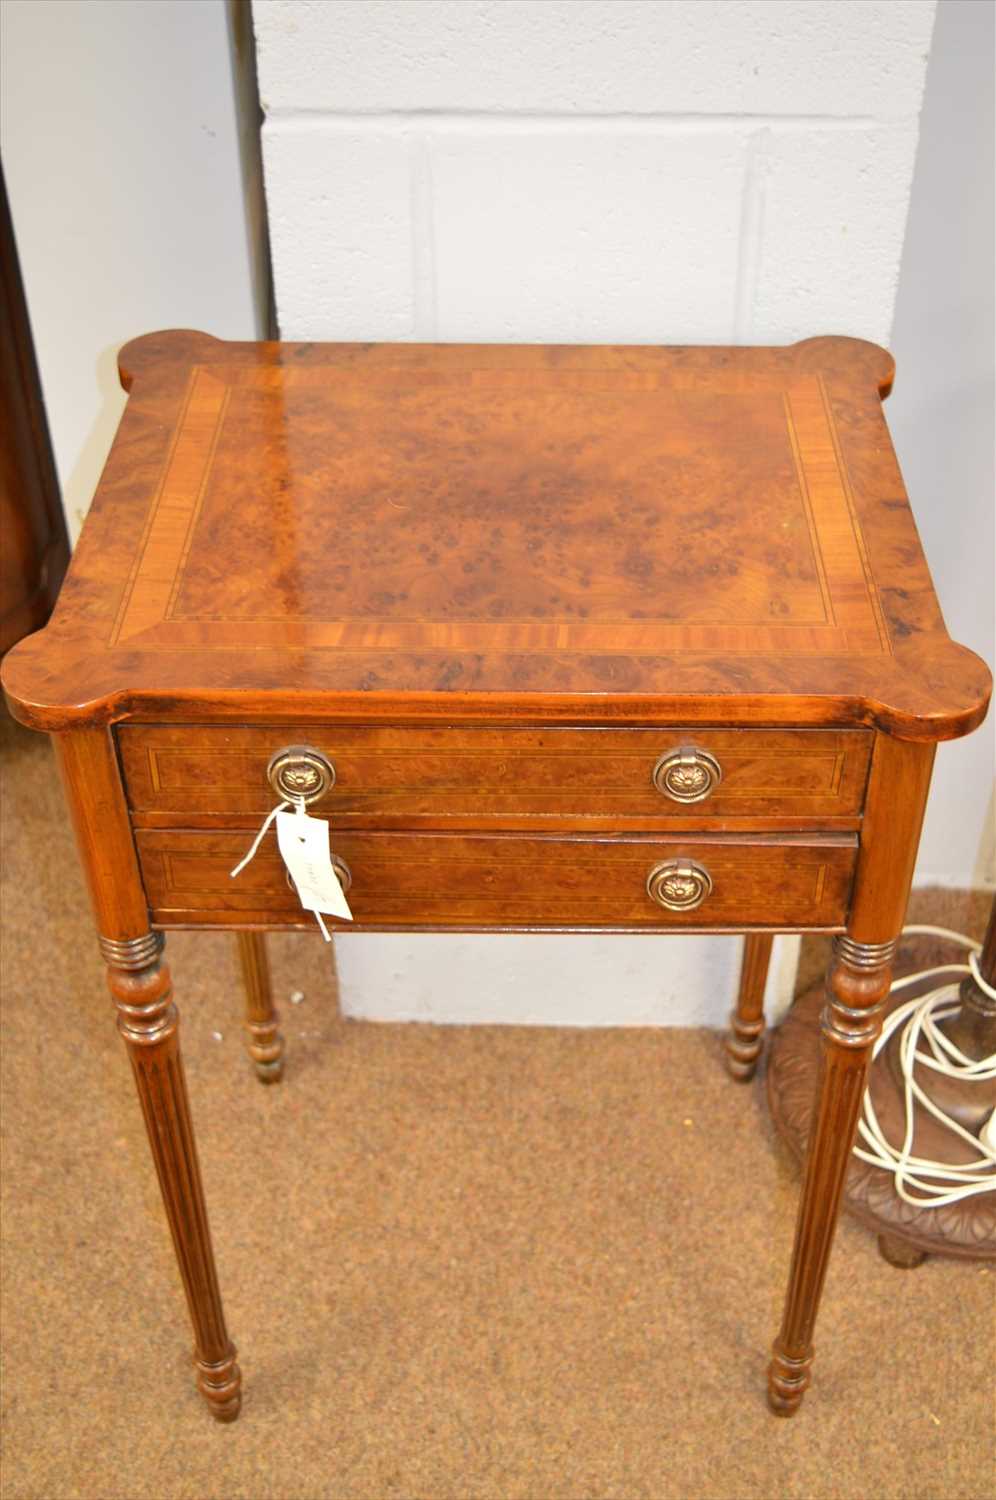 Lot 411 - side table